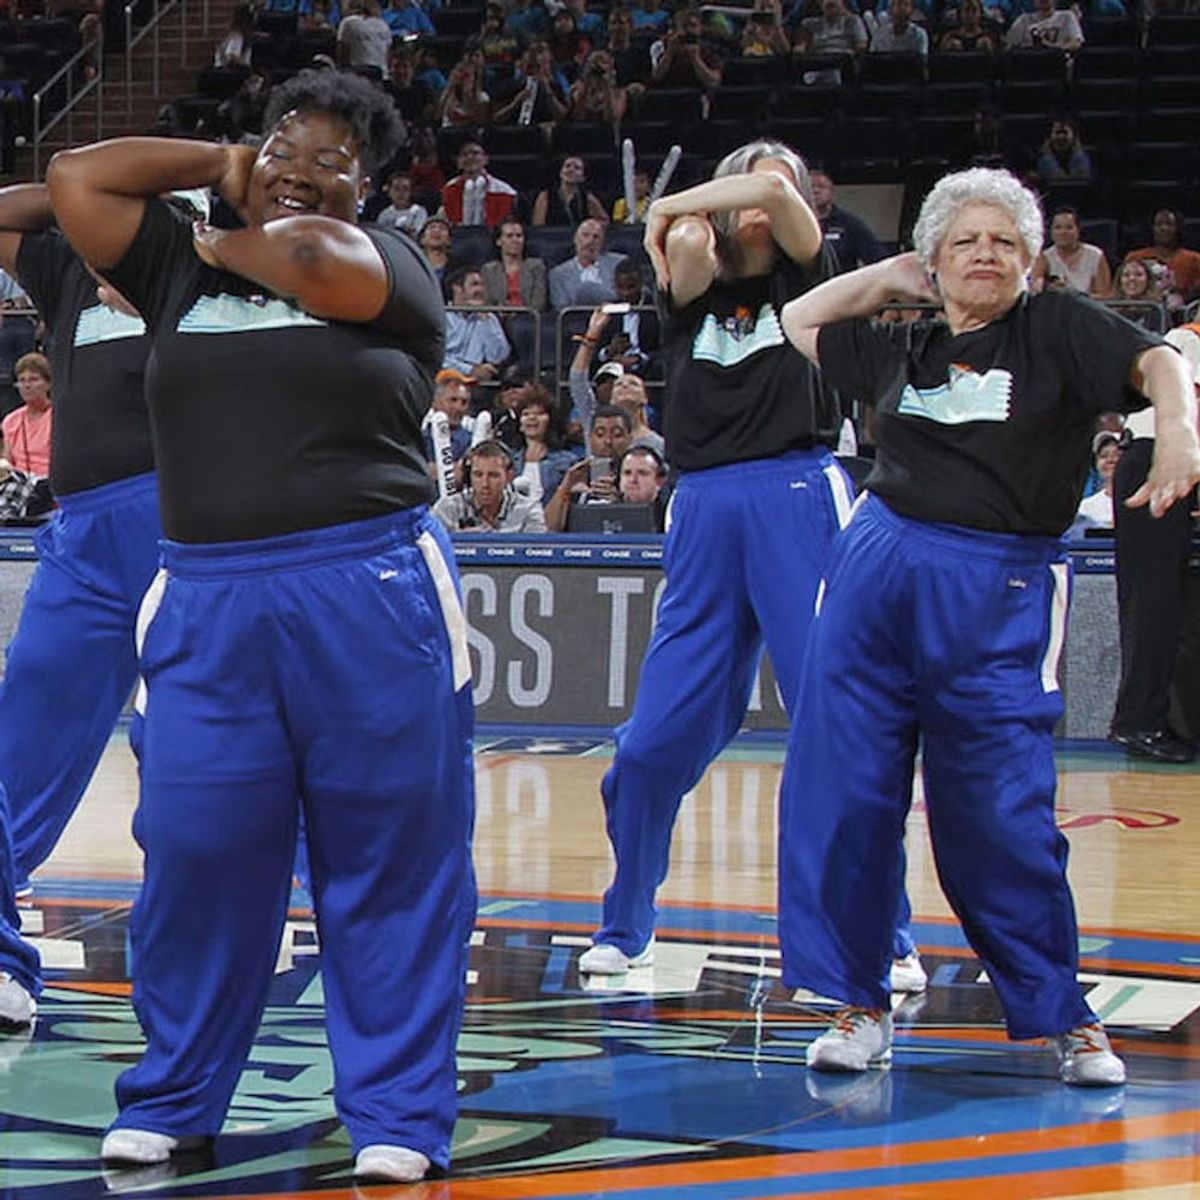 The WNBA’s Senior Dance Team Proves Age Is Just a Number in the BEST Way